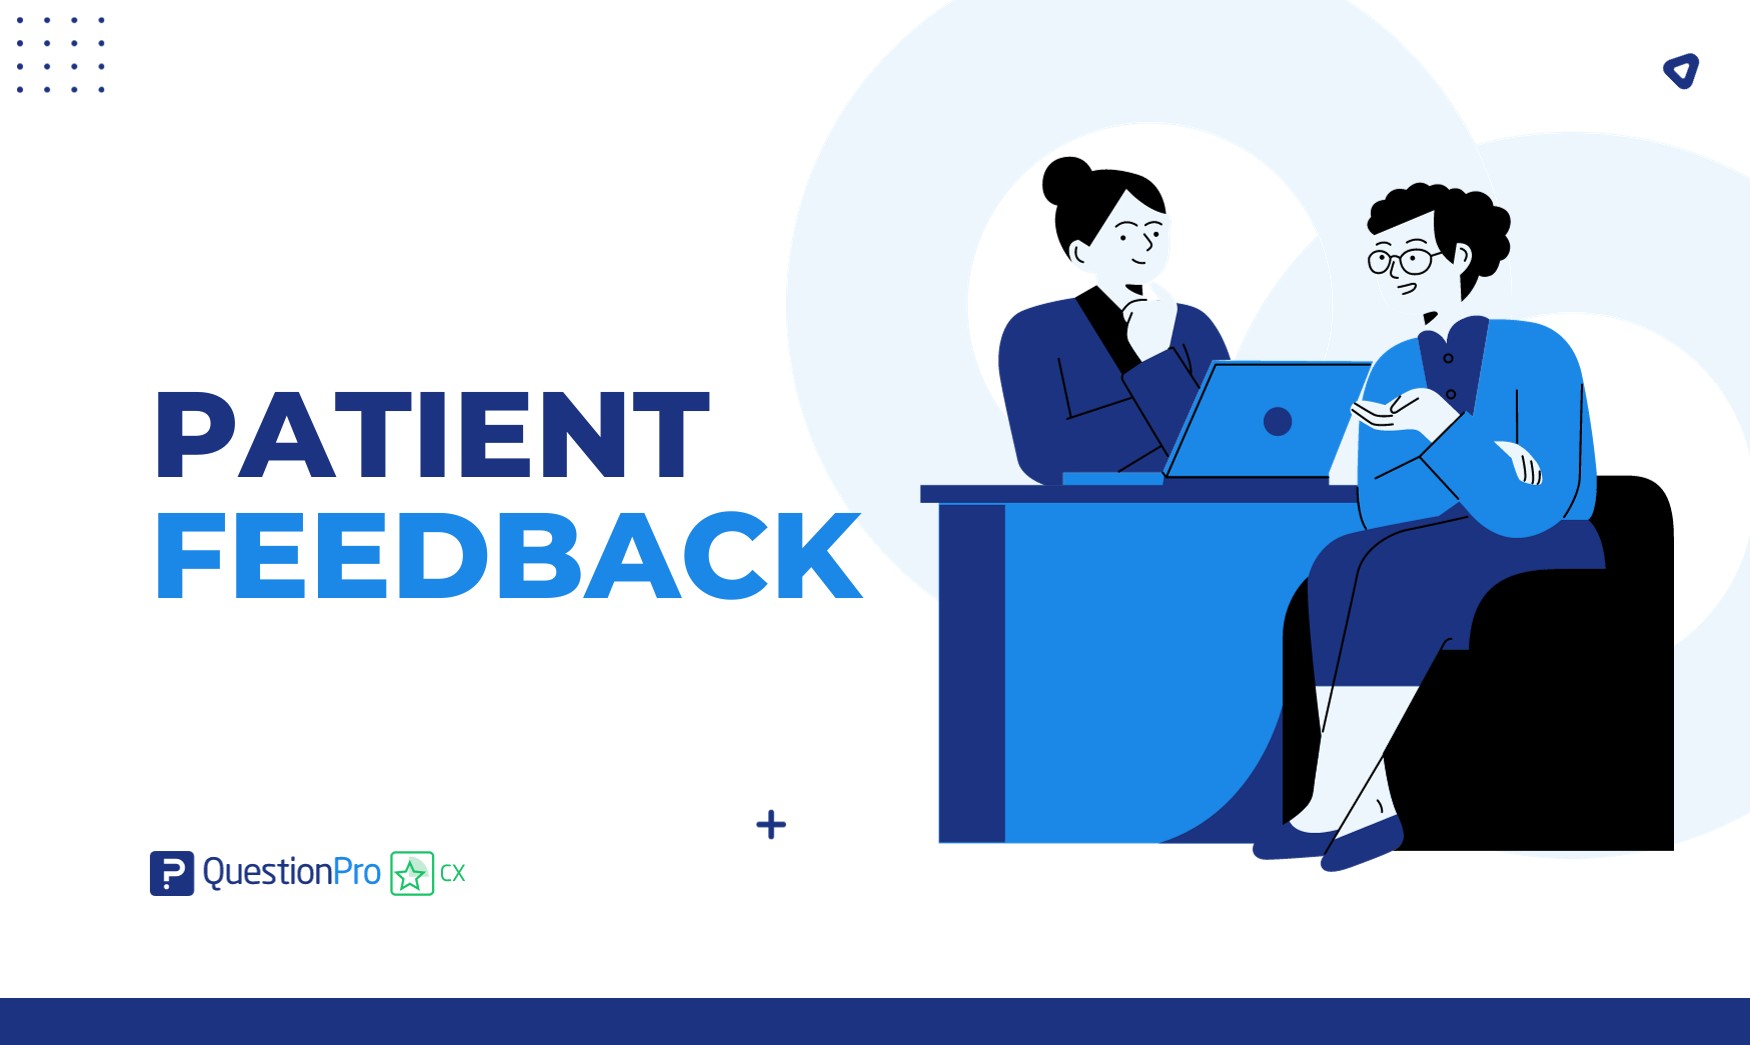 Discover how patient feedback can transform healthcare experiences. Explore our guide for valuable insights. Learn more.